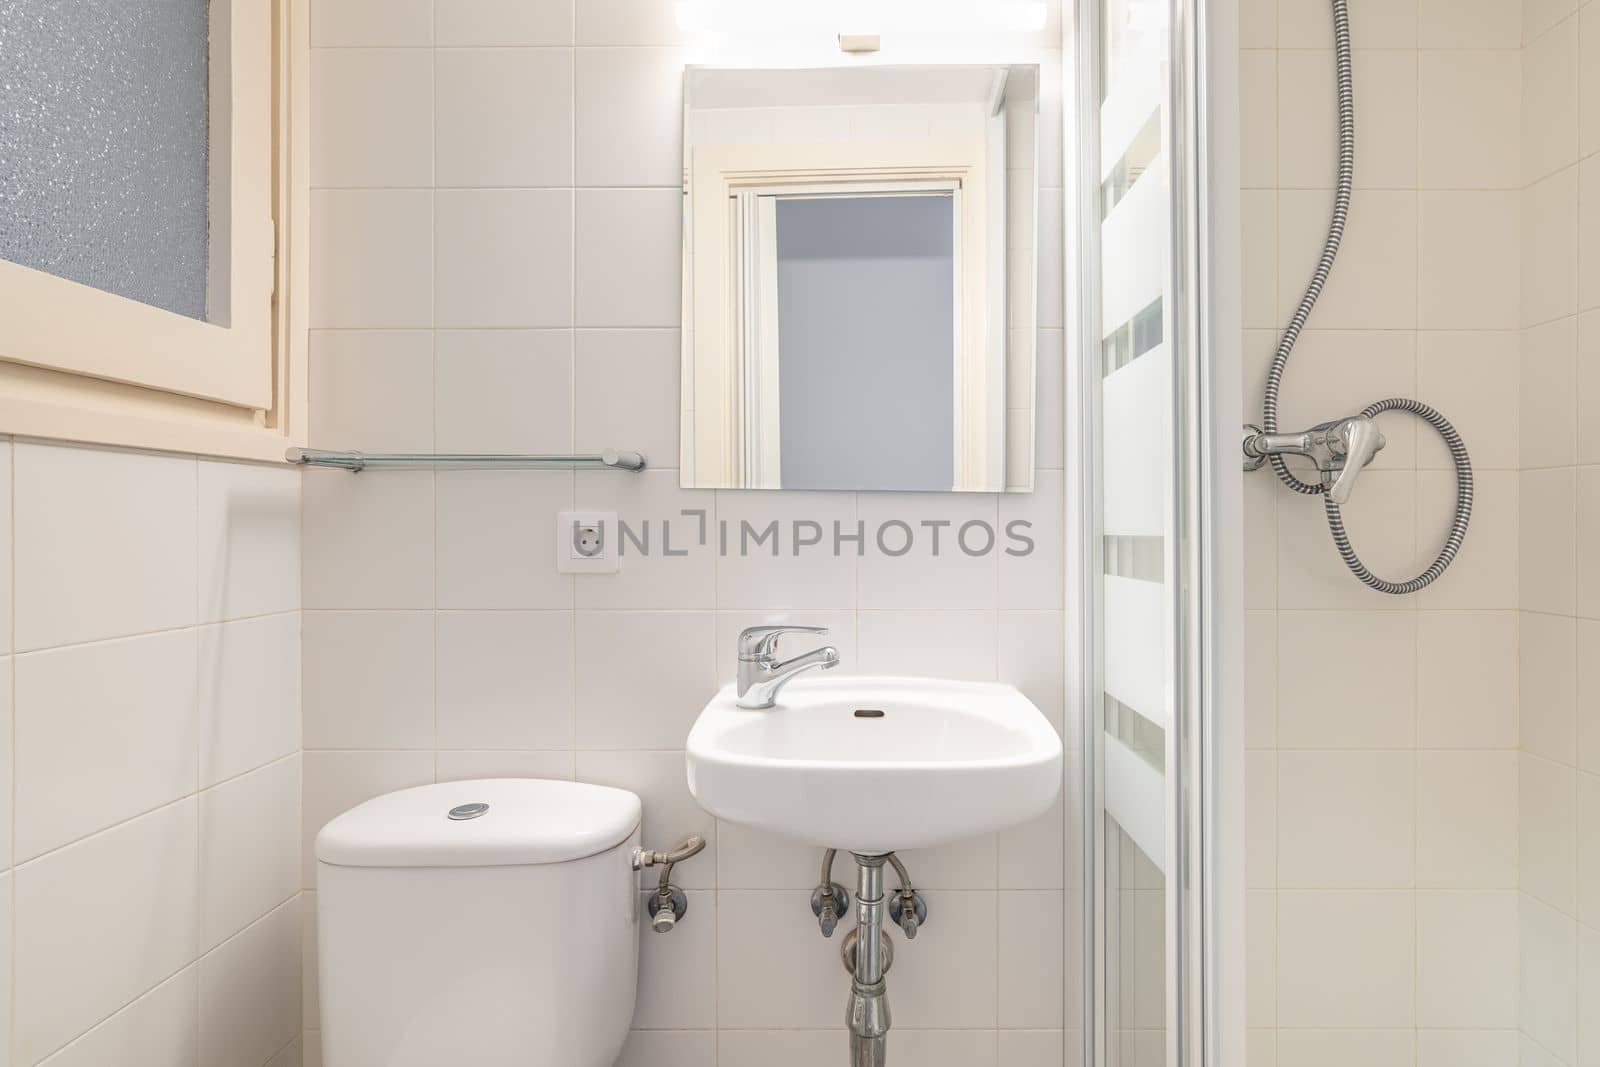 Bathroom with light walls. Shower with glass sliding doors and vanity sink with white furniture. Mirror is illuminated by bright lamps with a reflection of the front door. by apavlin